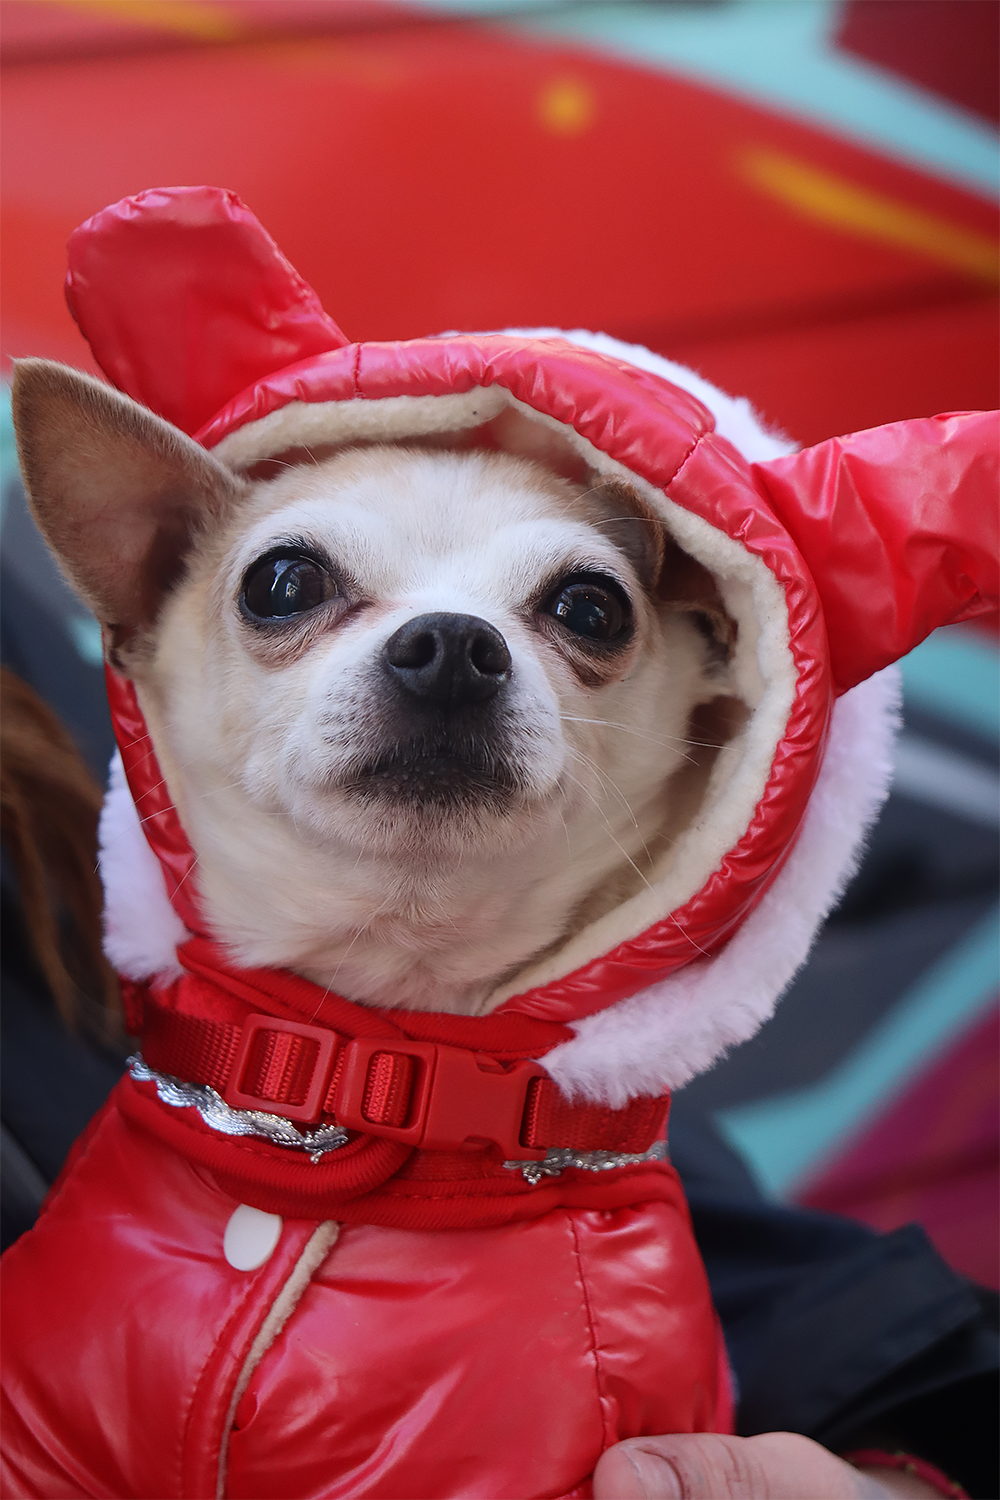 A close-up picture of a white chihuahua dressed up in a bright red coat with hood over one of his ears.